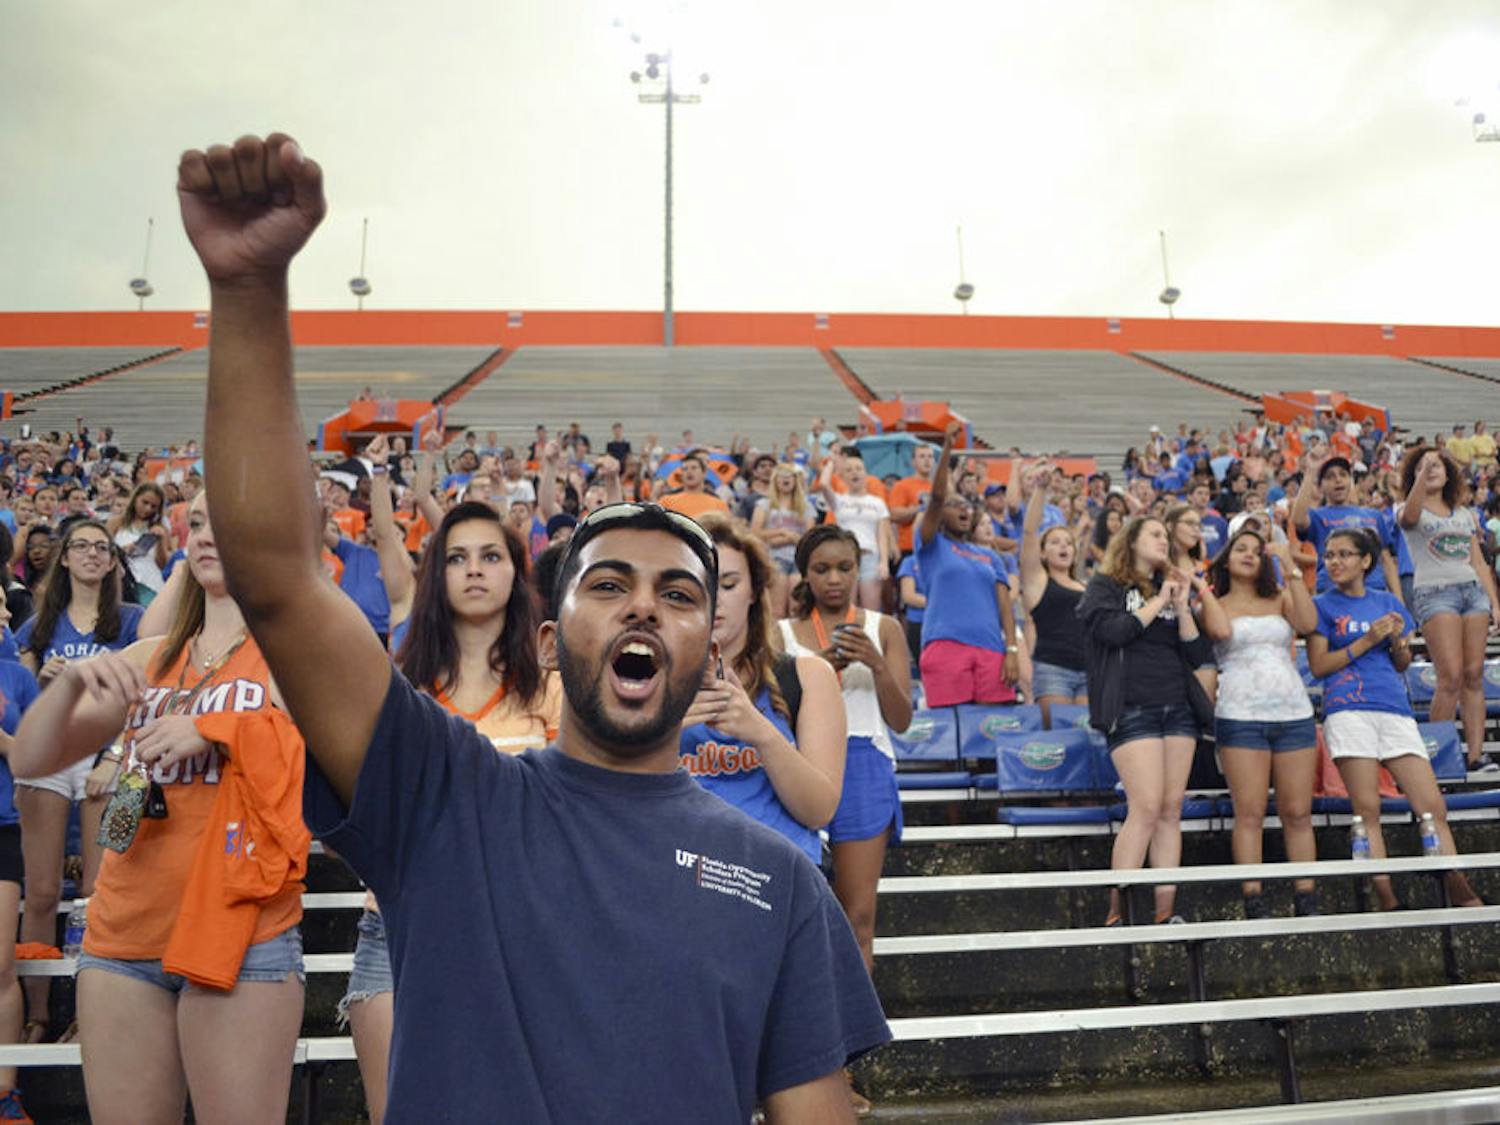 Aaron Rampersad, a 21-year-old UF microbiology and nutritional sciences senior, shouts “Go Gators!” at the Rally in the Swamp event at Ben Hill Griffin Stadium Sunday. Rally goers were led through a series of chants and songs that will be used during UF sporting events.